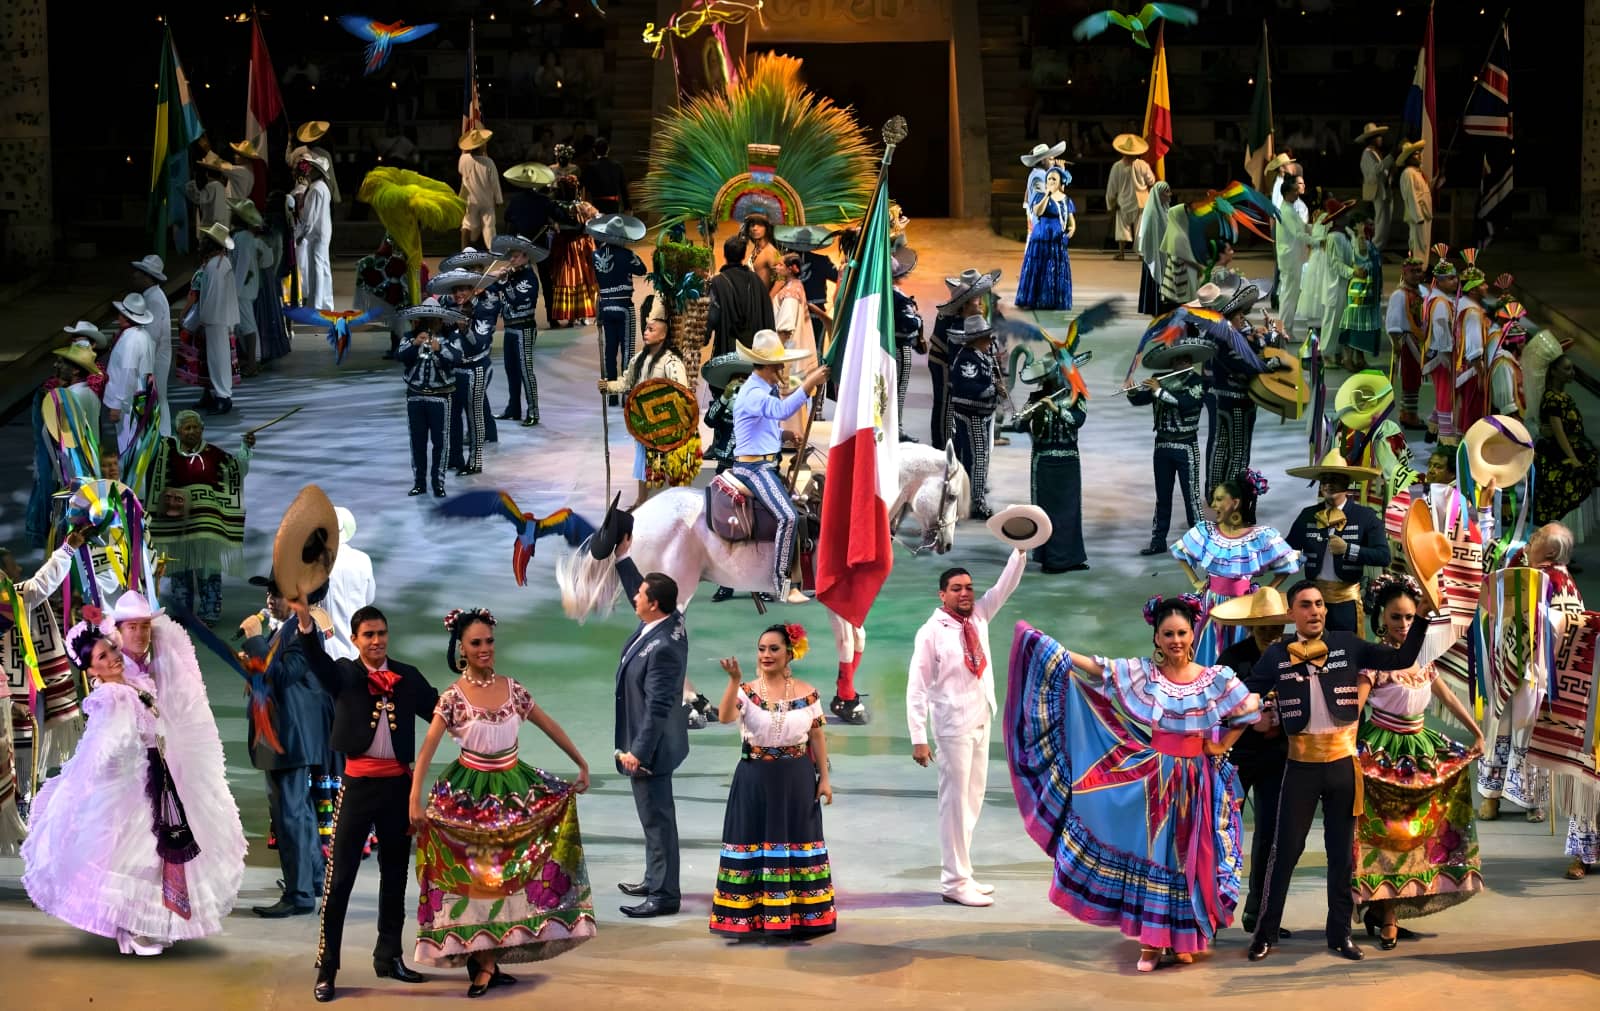 Folkloric show with representation from all the states of Mexico.